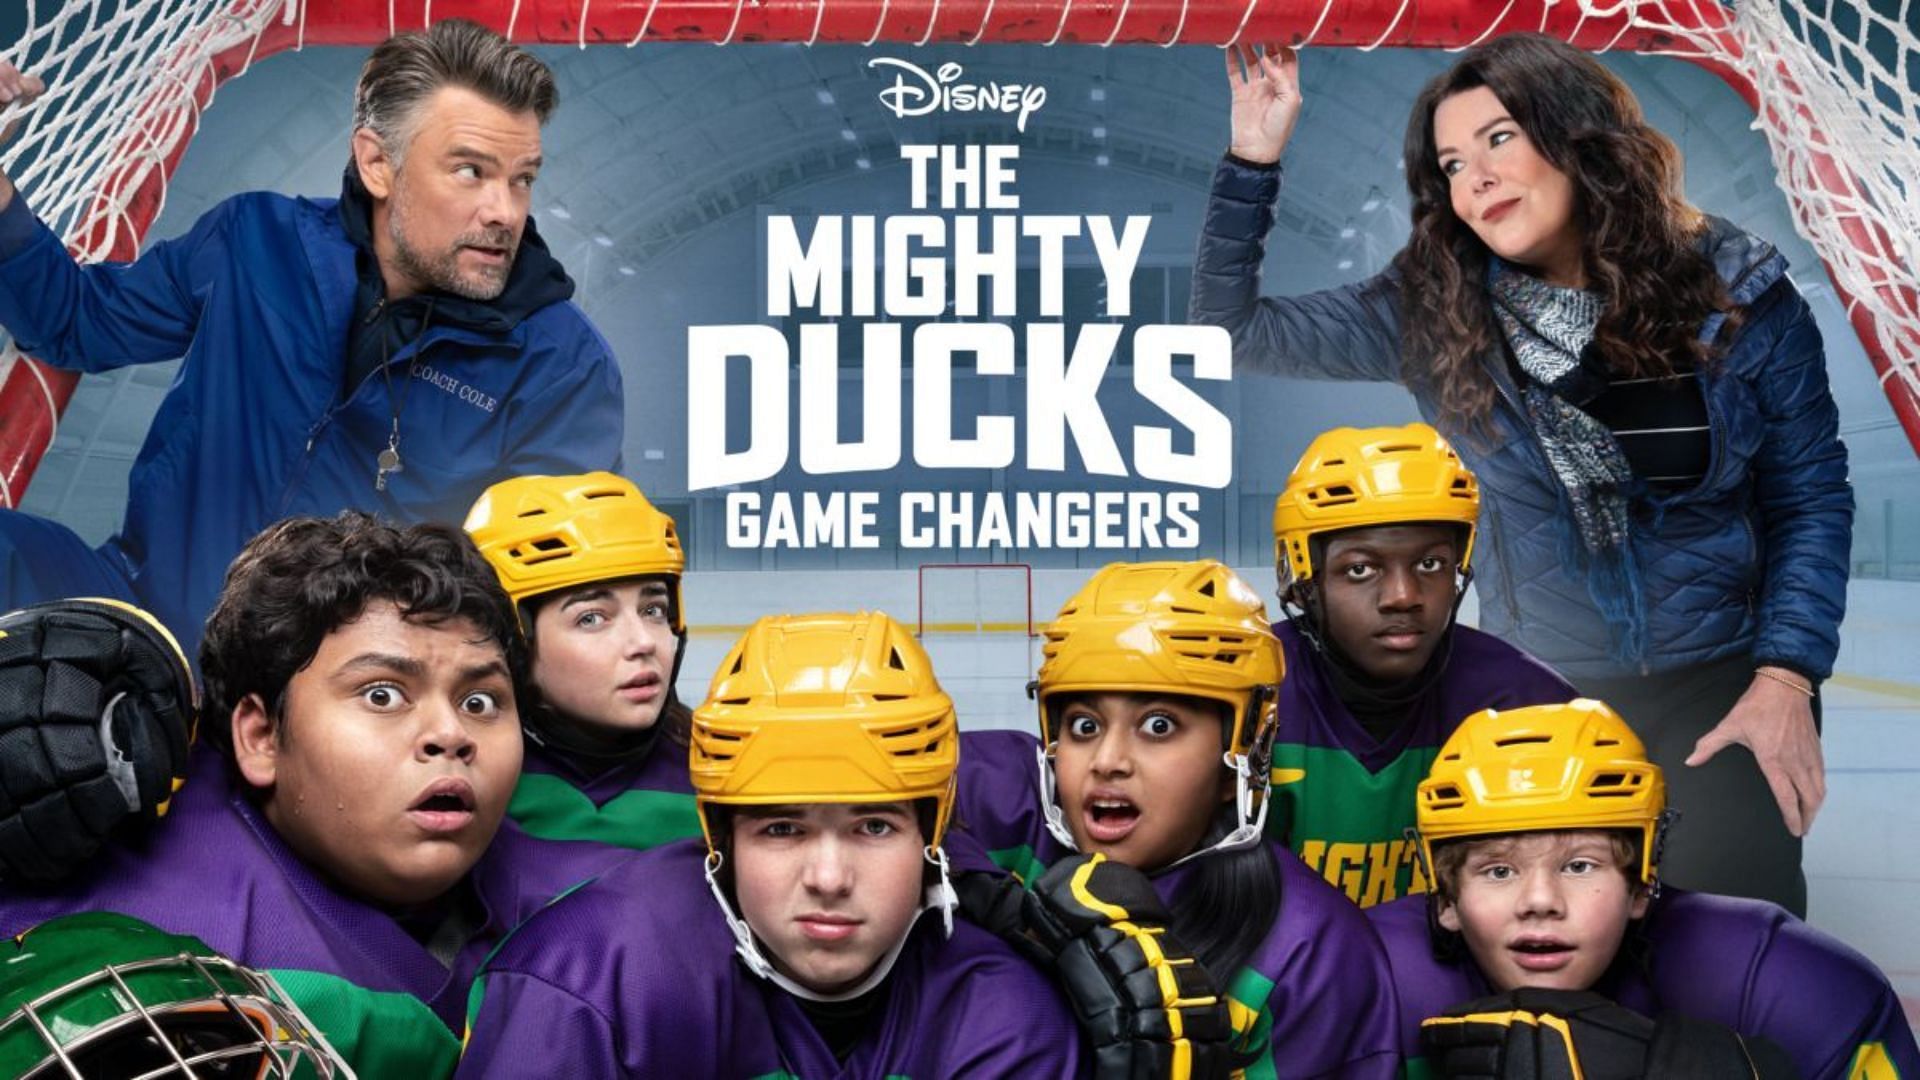 What was the Disney show The Mighty Ducks Game Changers all about and